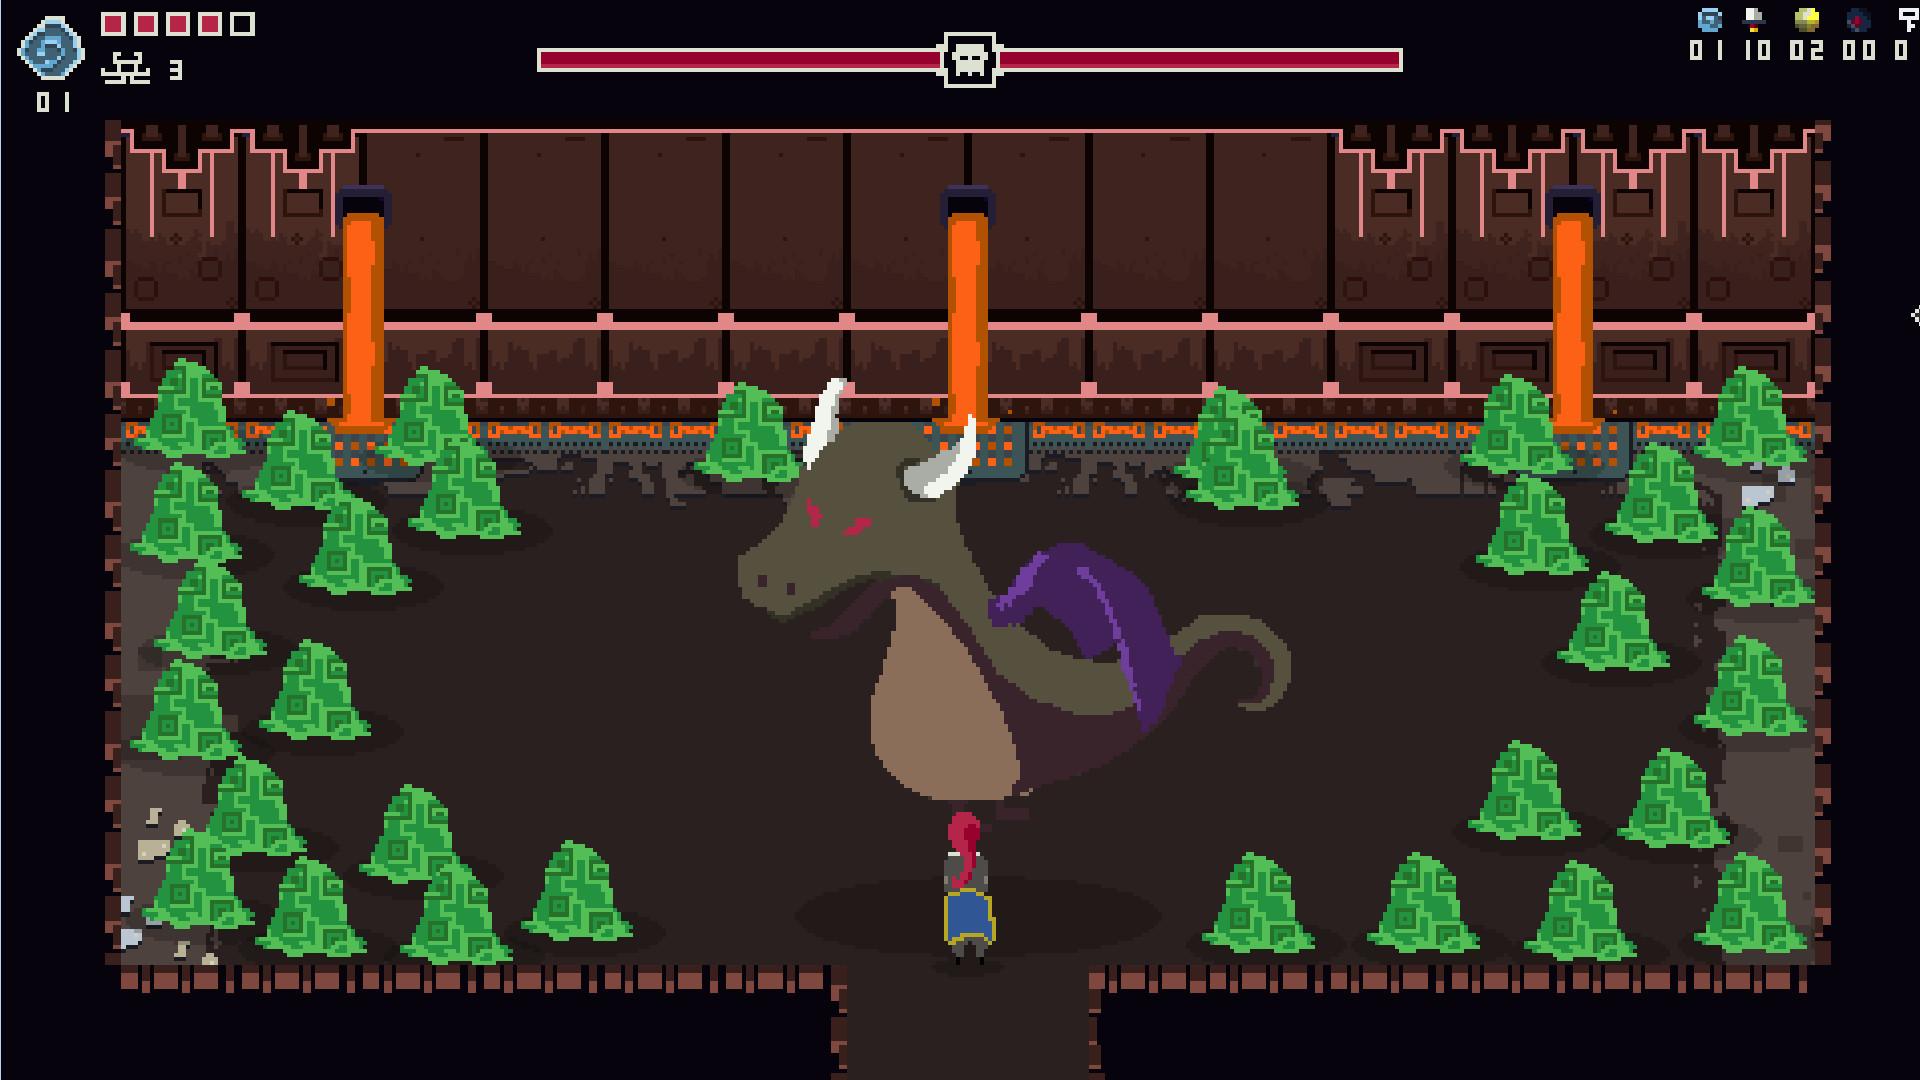 Screenshot №7 from game Silver Knight